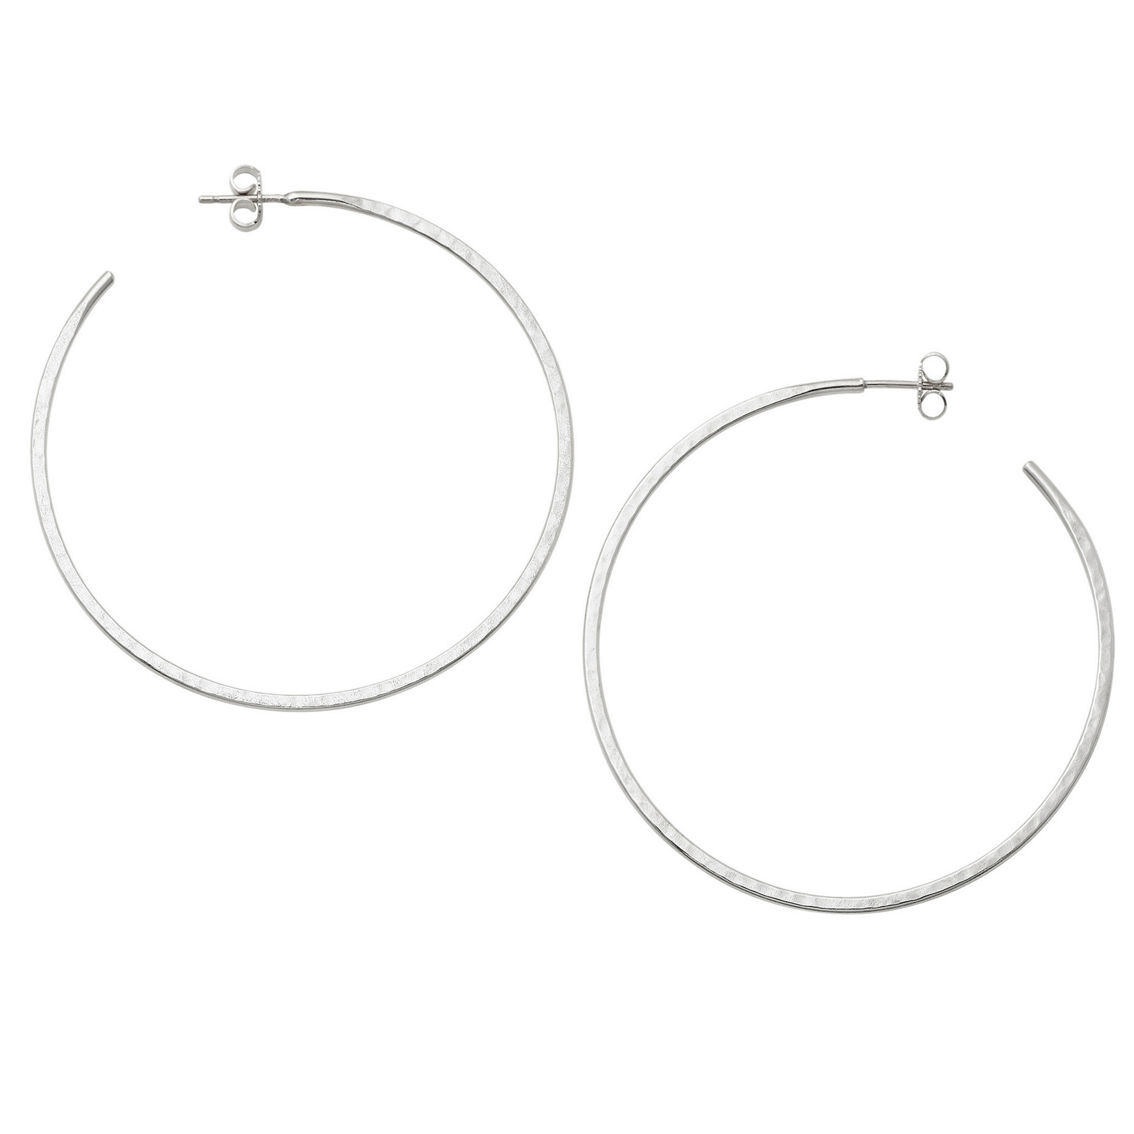 James Avery 14K Yellow Gold Classic Hammered Hoop Earrings, Extra Large - Image 3 of 4